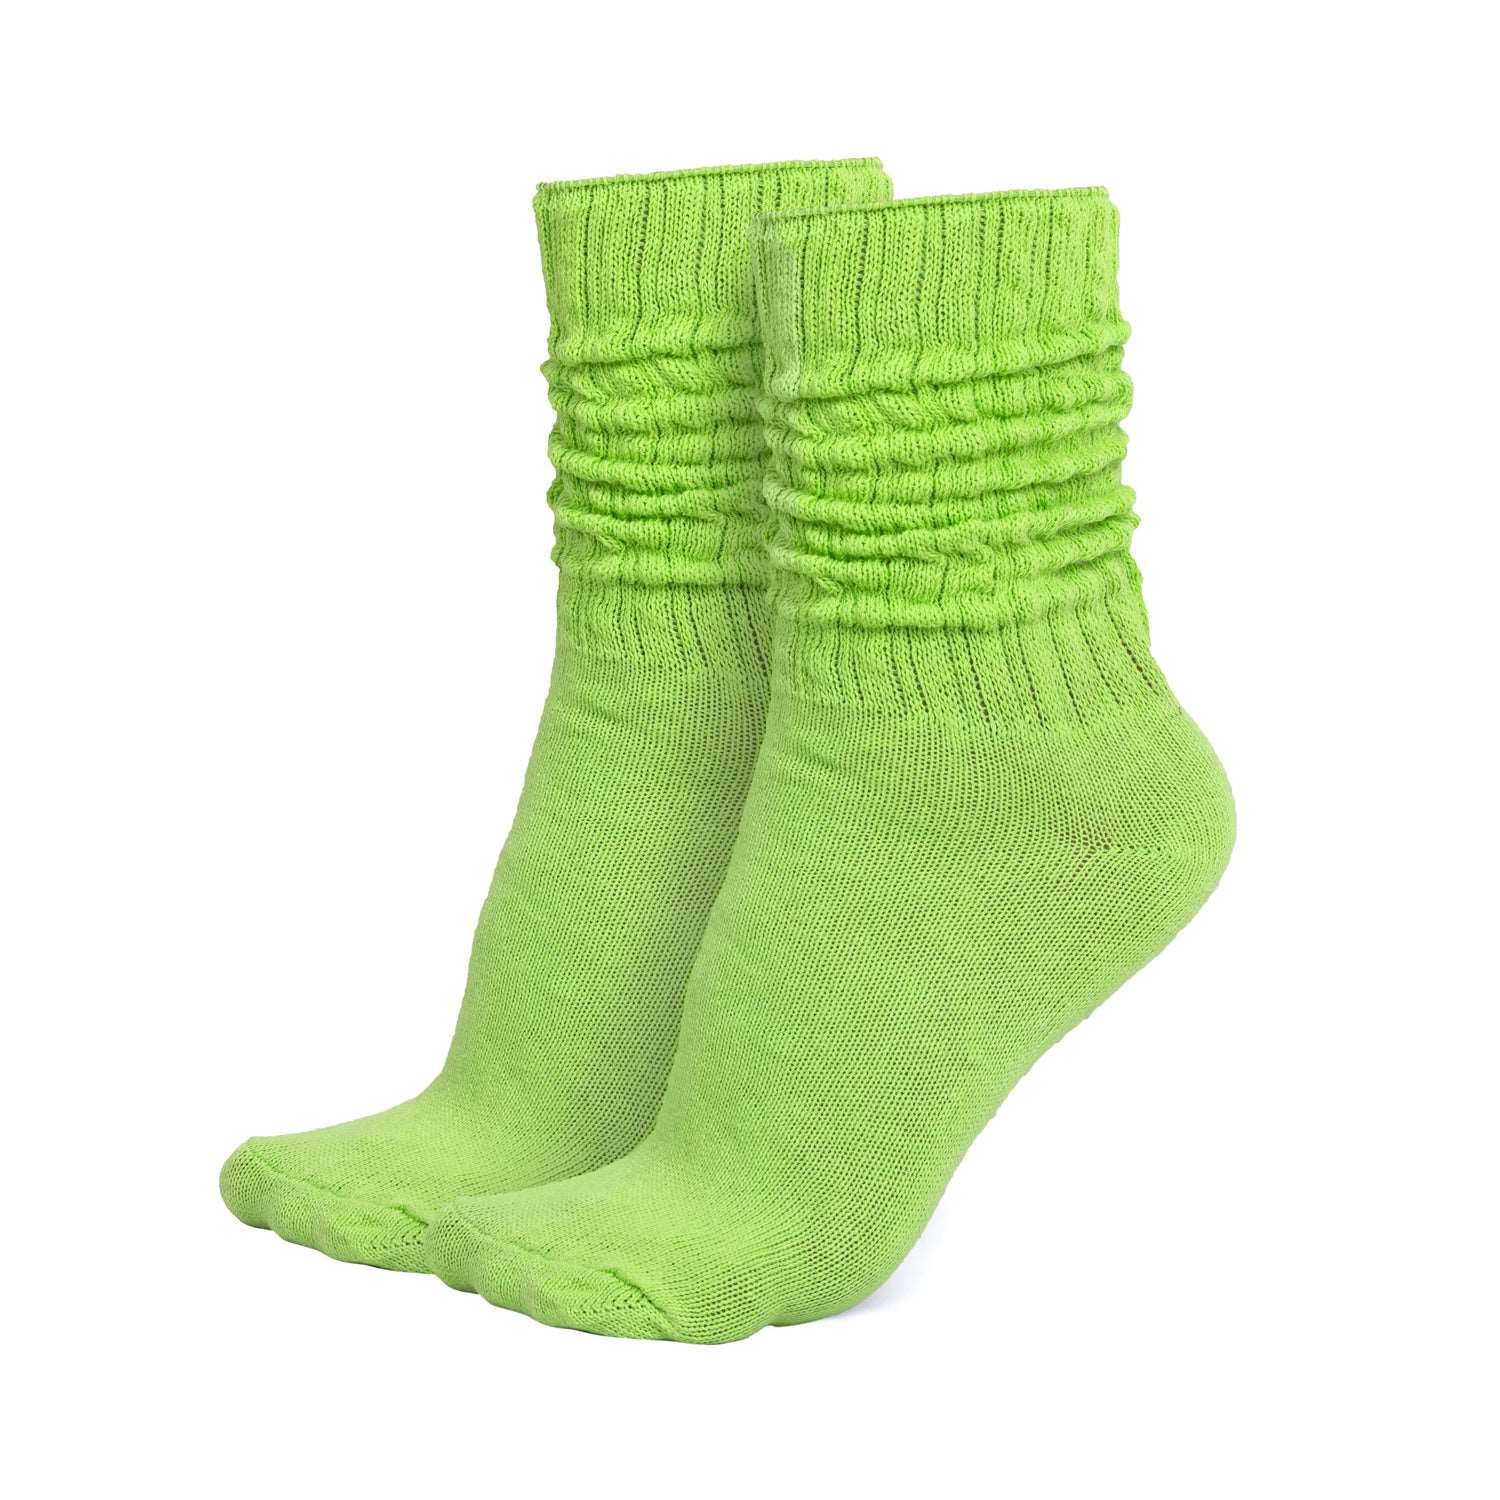 MDR Lightweight Cotton Slouch Socks For Women and Men 1 Pair Made in USA Size 9 to 11 (Lime)